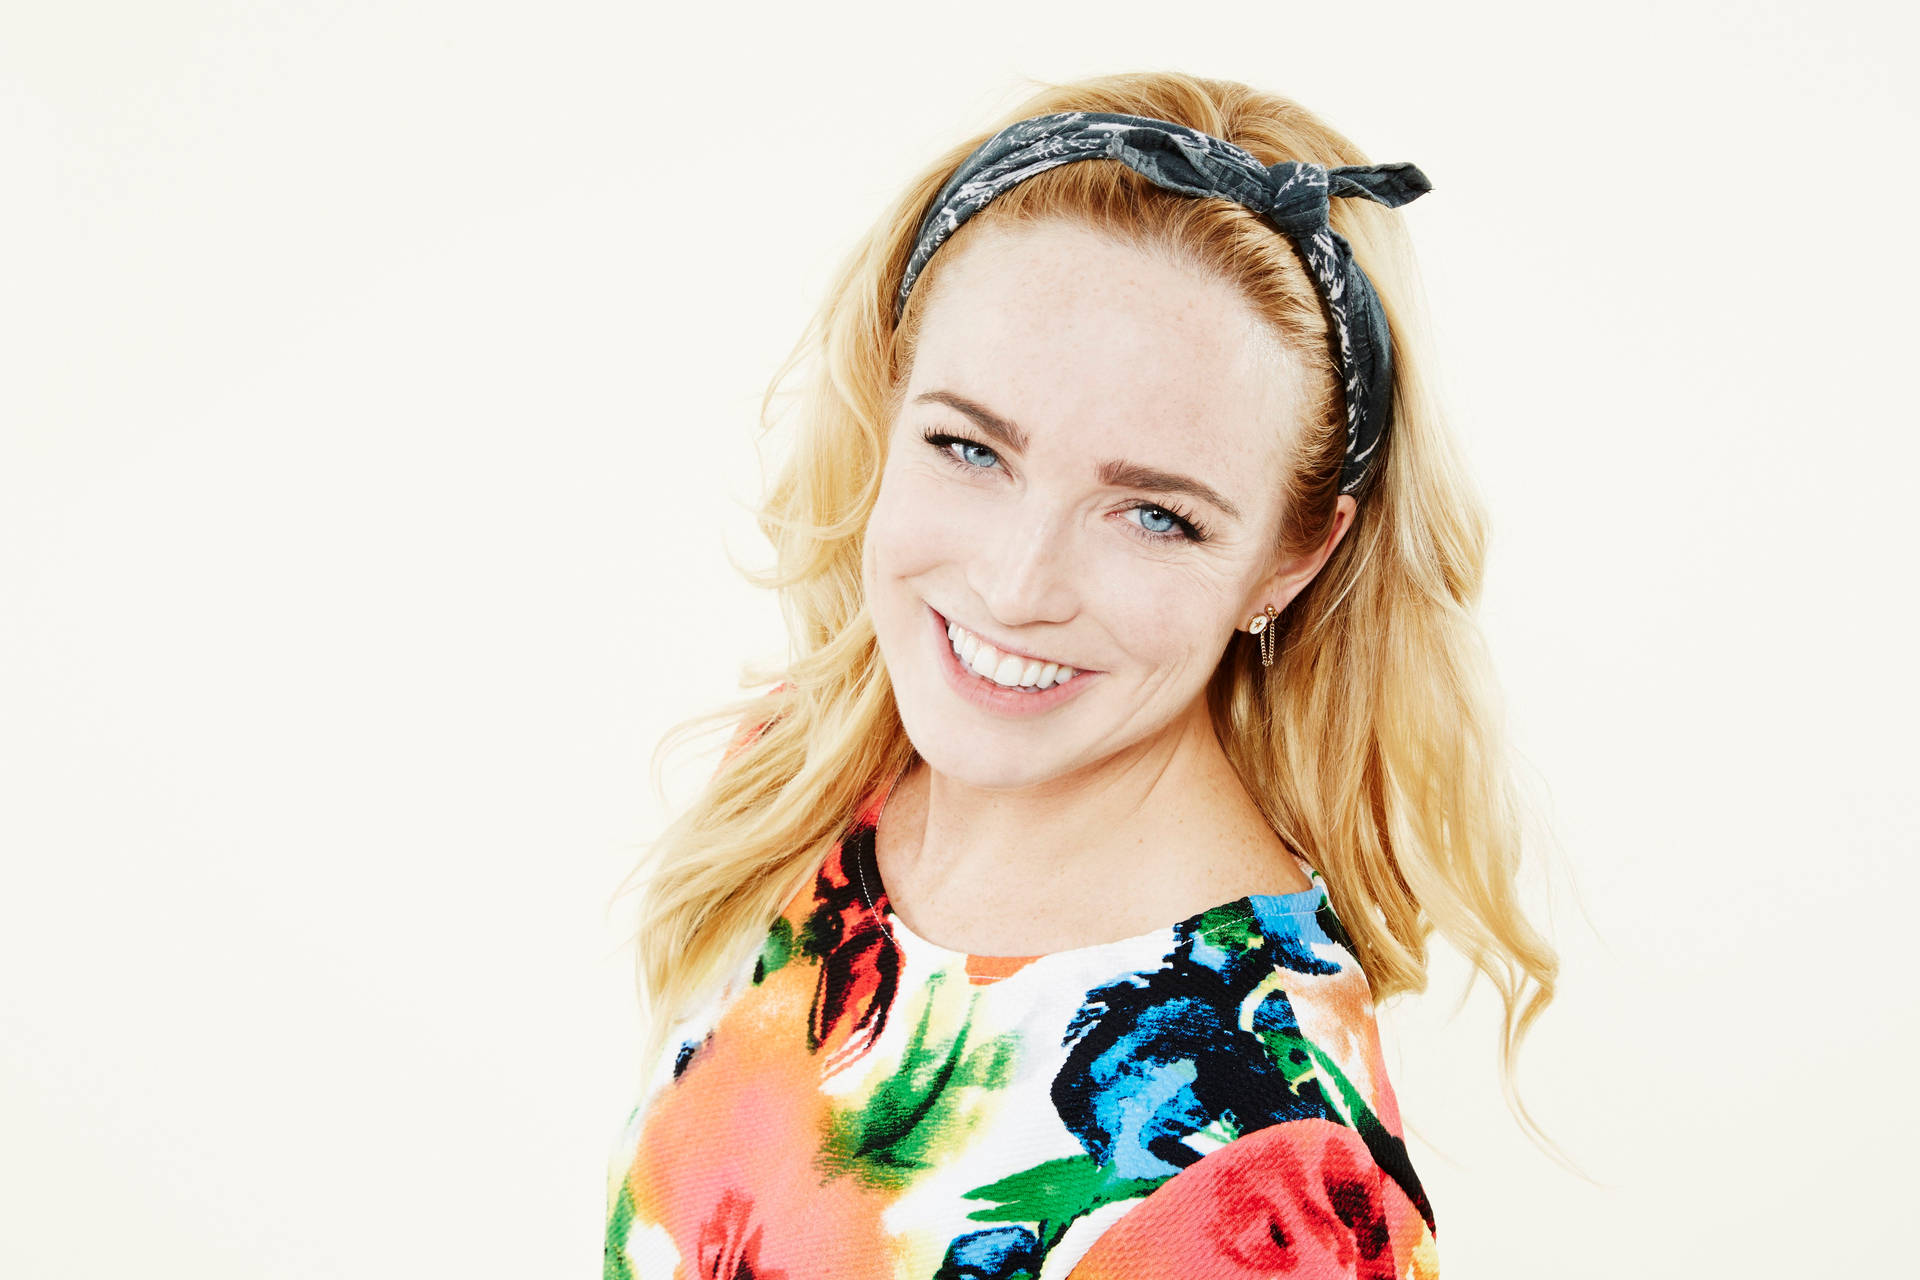 1436 Caity Lotz Photos  High Res Pictures  Getty Images